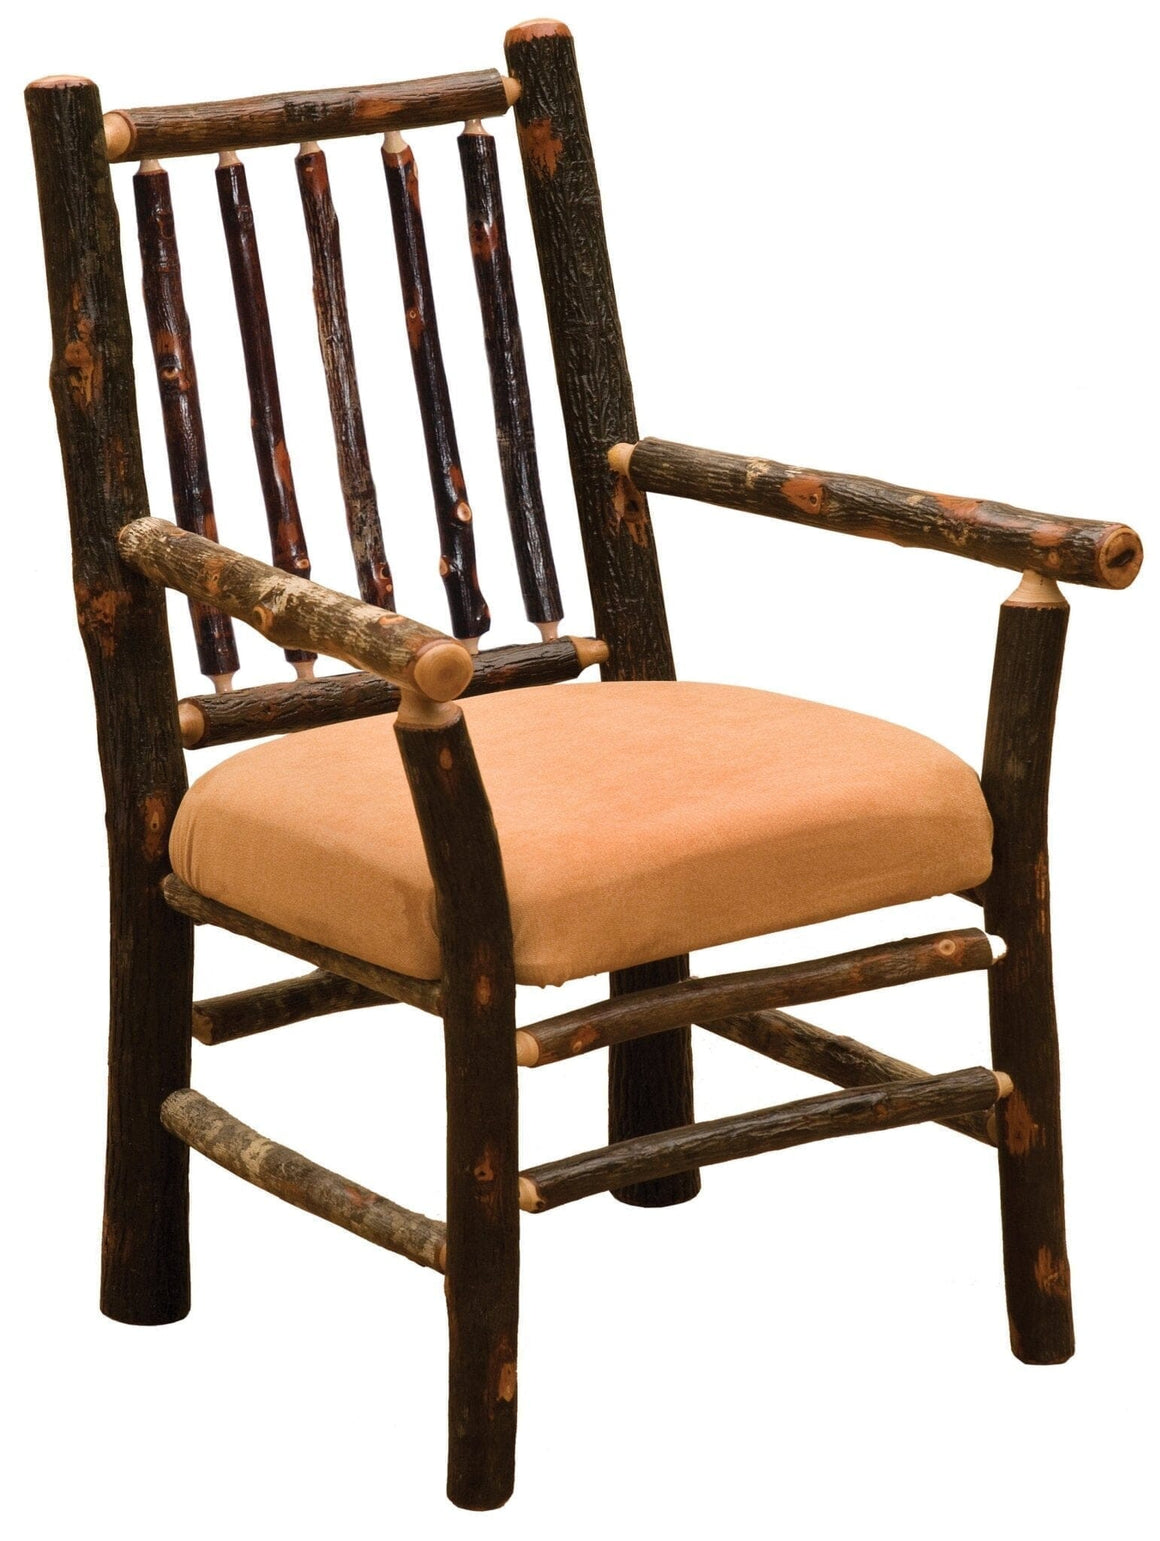 Natural Hickory Log Spoke Back Arm Chair - Upholstered Seat - Standard Finish - Rustic Deco Incorporated